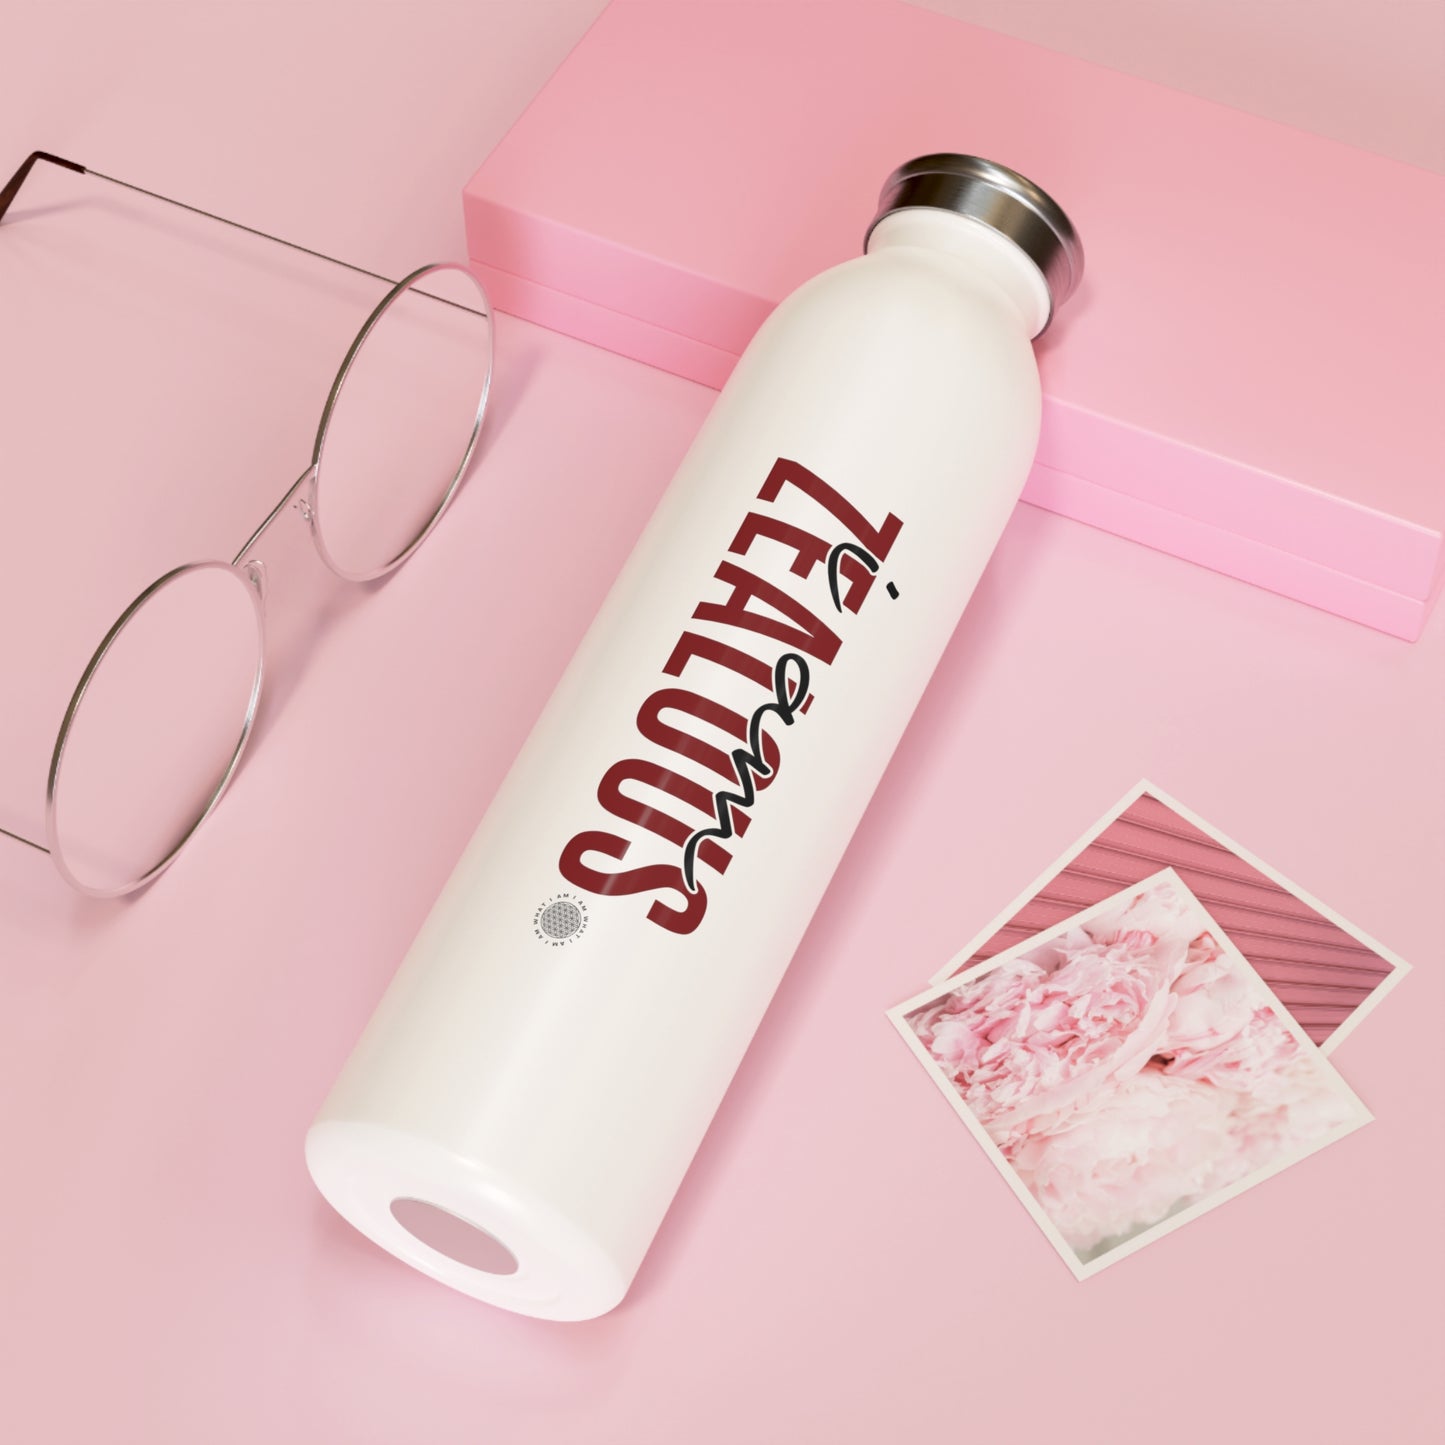 Introducing the I Am Zealous Slim Water Bottle from I Am What I Am Shop. This stylish and slim water bottle is perfect for any occasion.